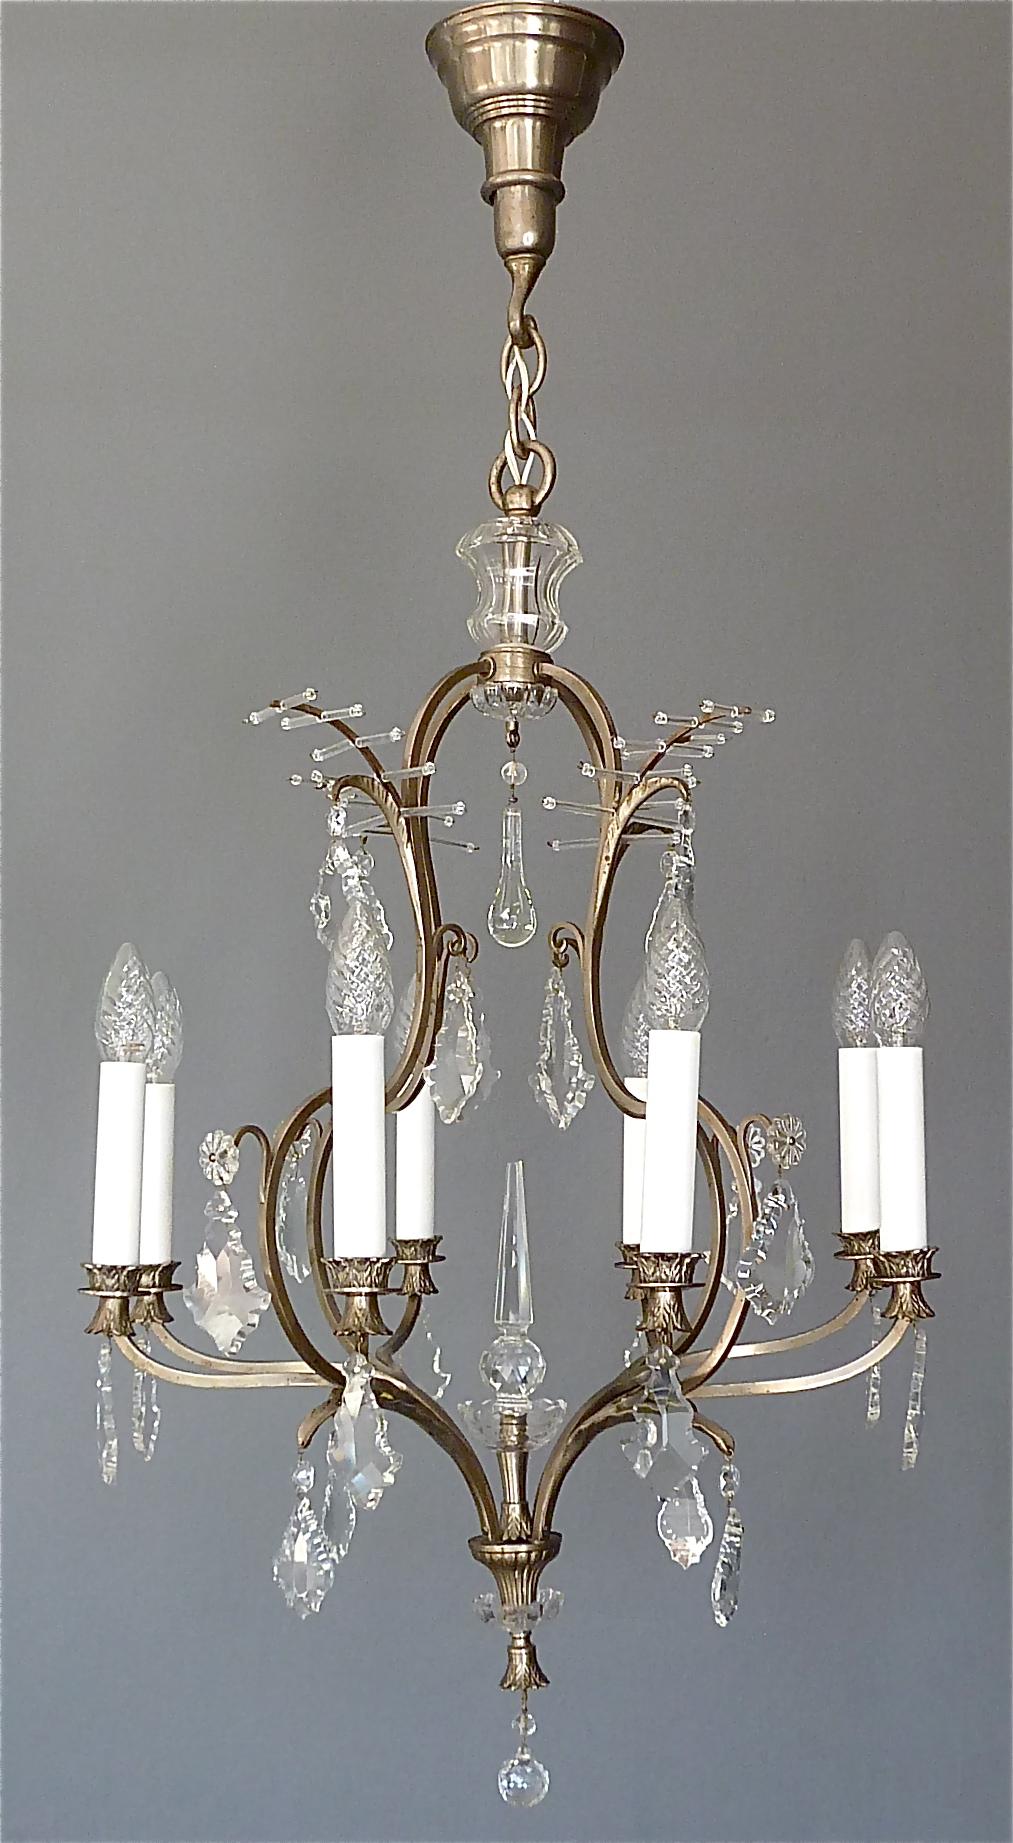 Beautiful classical and antique eight-light chandelier made of patinated metal and hand-cut faceted crystal glass, manufactured in Austria around 1910-1920. This chandelier with lovely details especially the palm-leaf crown motif on top and the